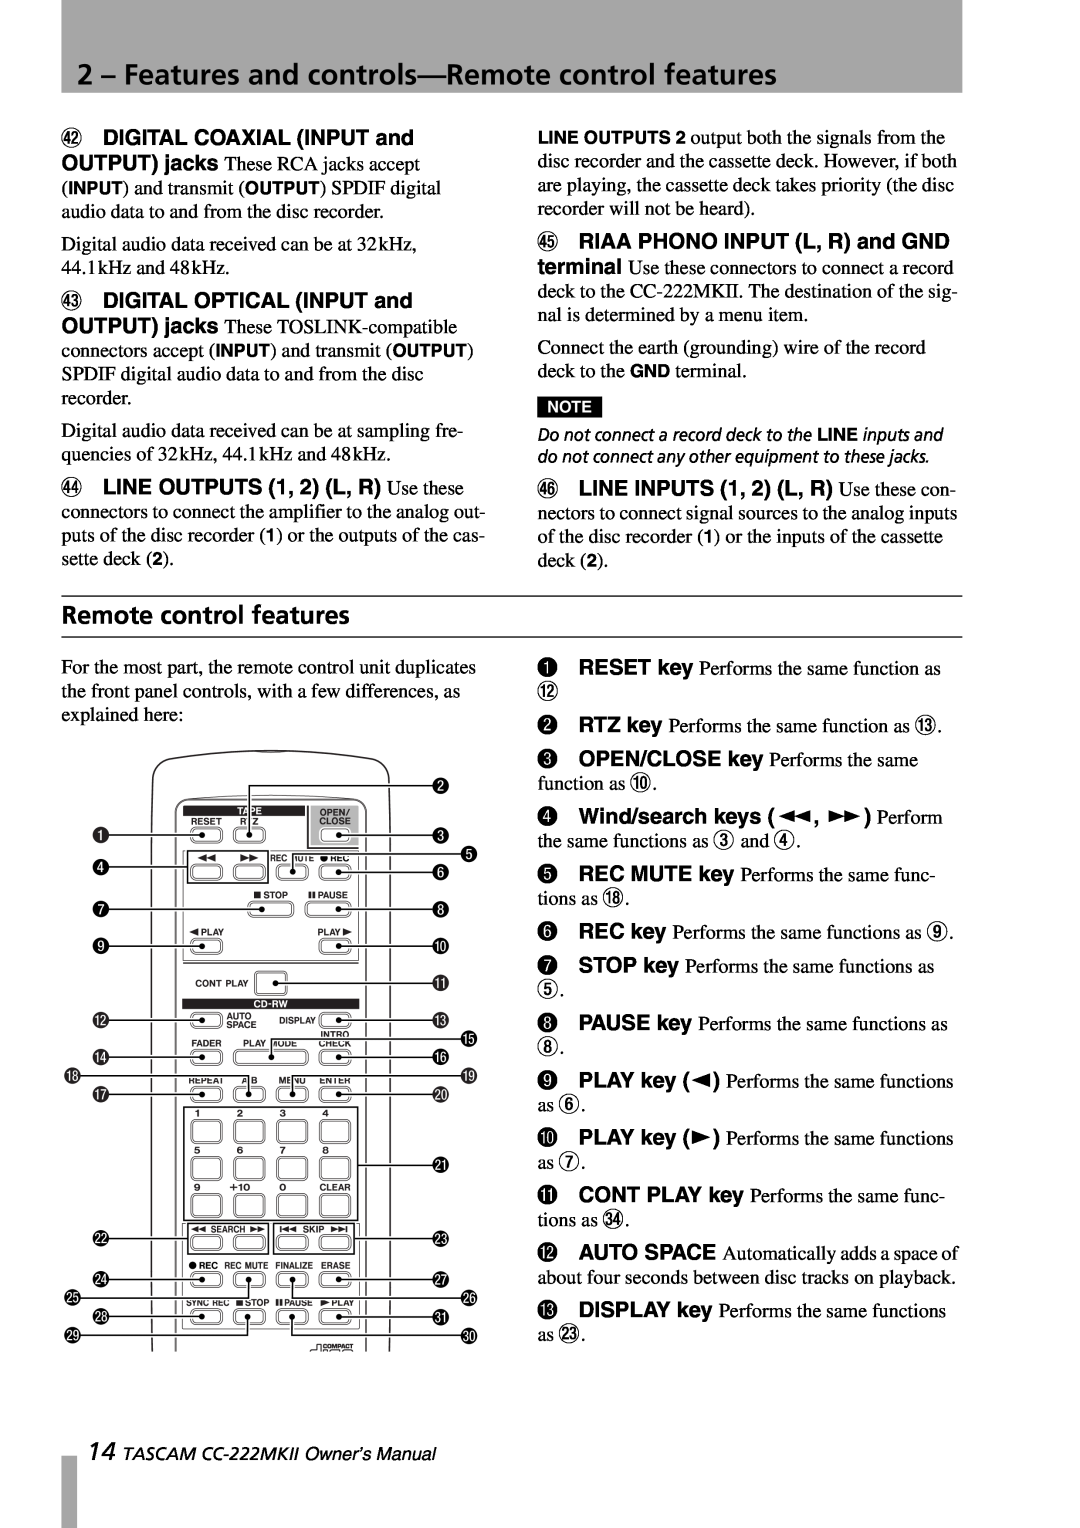 Tascam CC-222MKII owner manual Features and controls-Remotecontrol features, Remote control features 